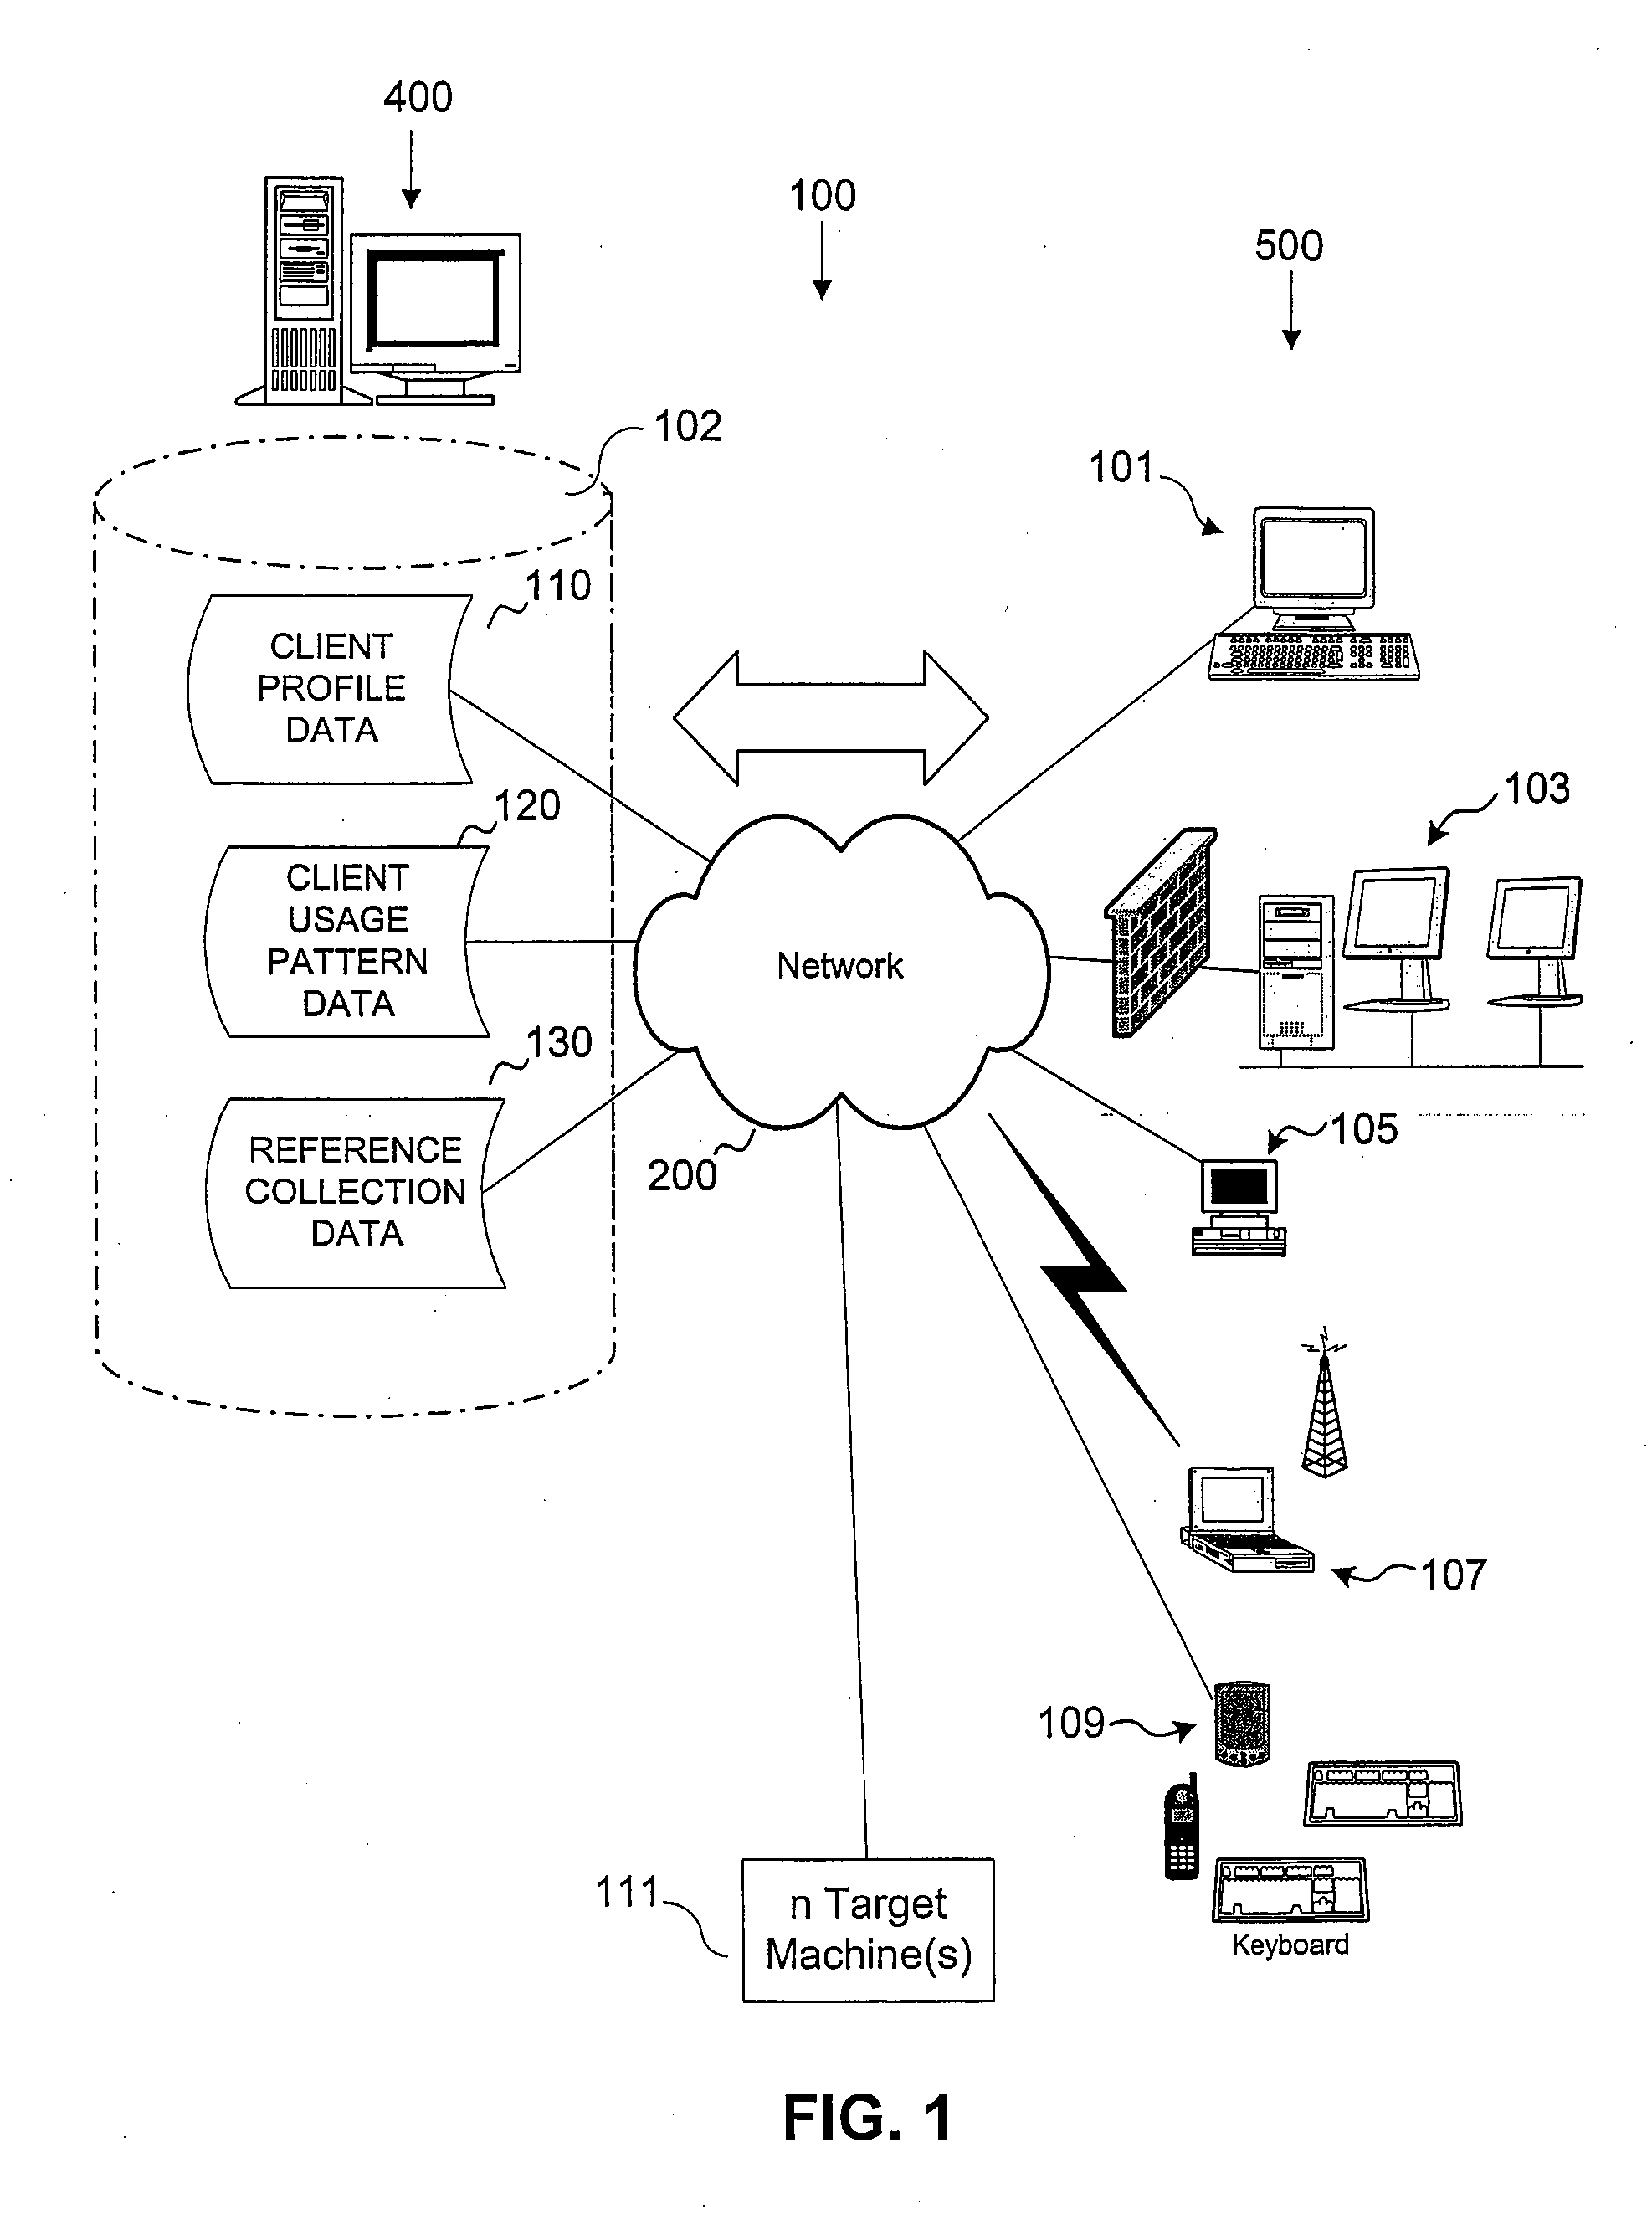 System and Method for Management of End User Computing Devices